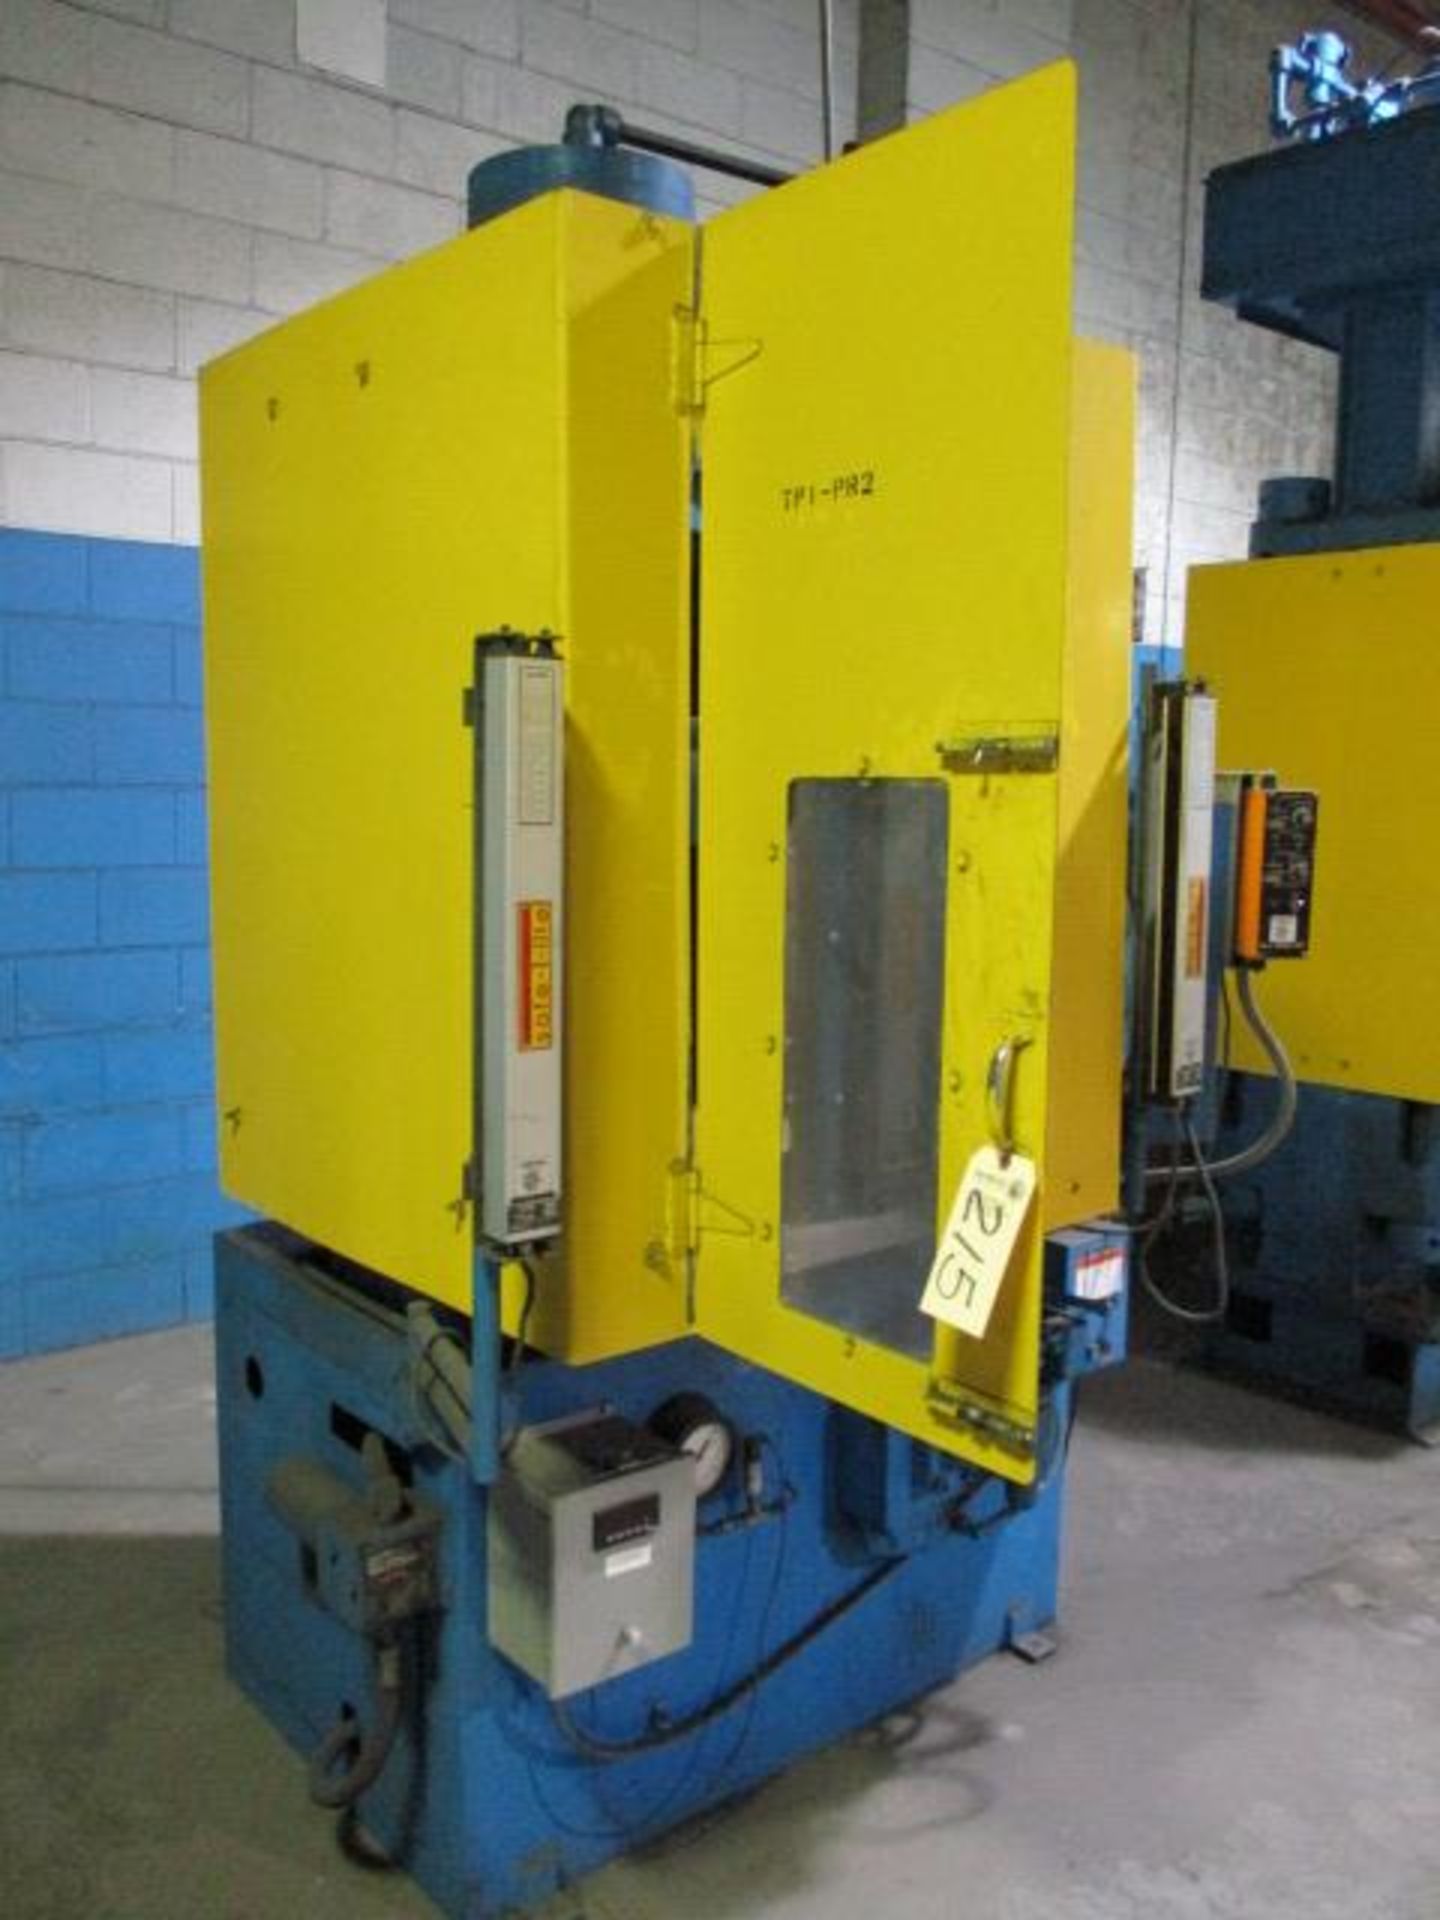 Mohr/Modern Hydraulic Corp Model IR 200 Ton Compaction Press - Image 2 of 6